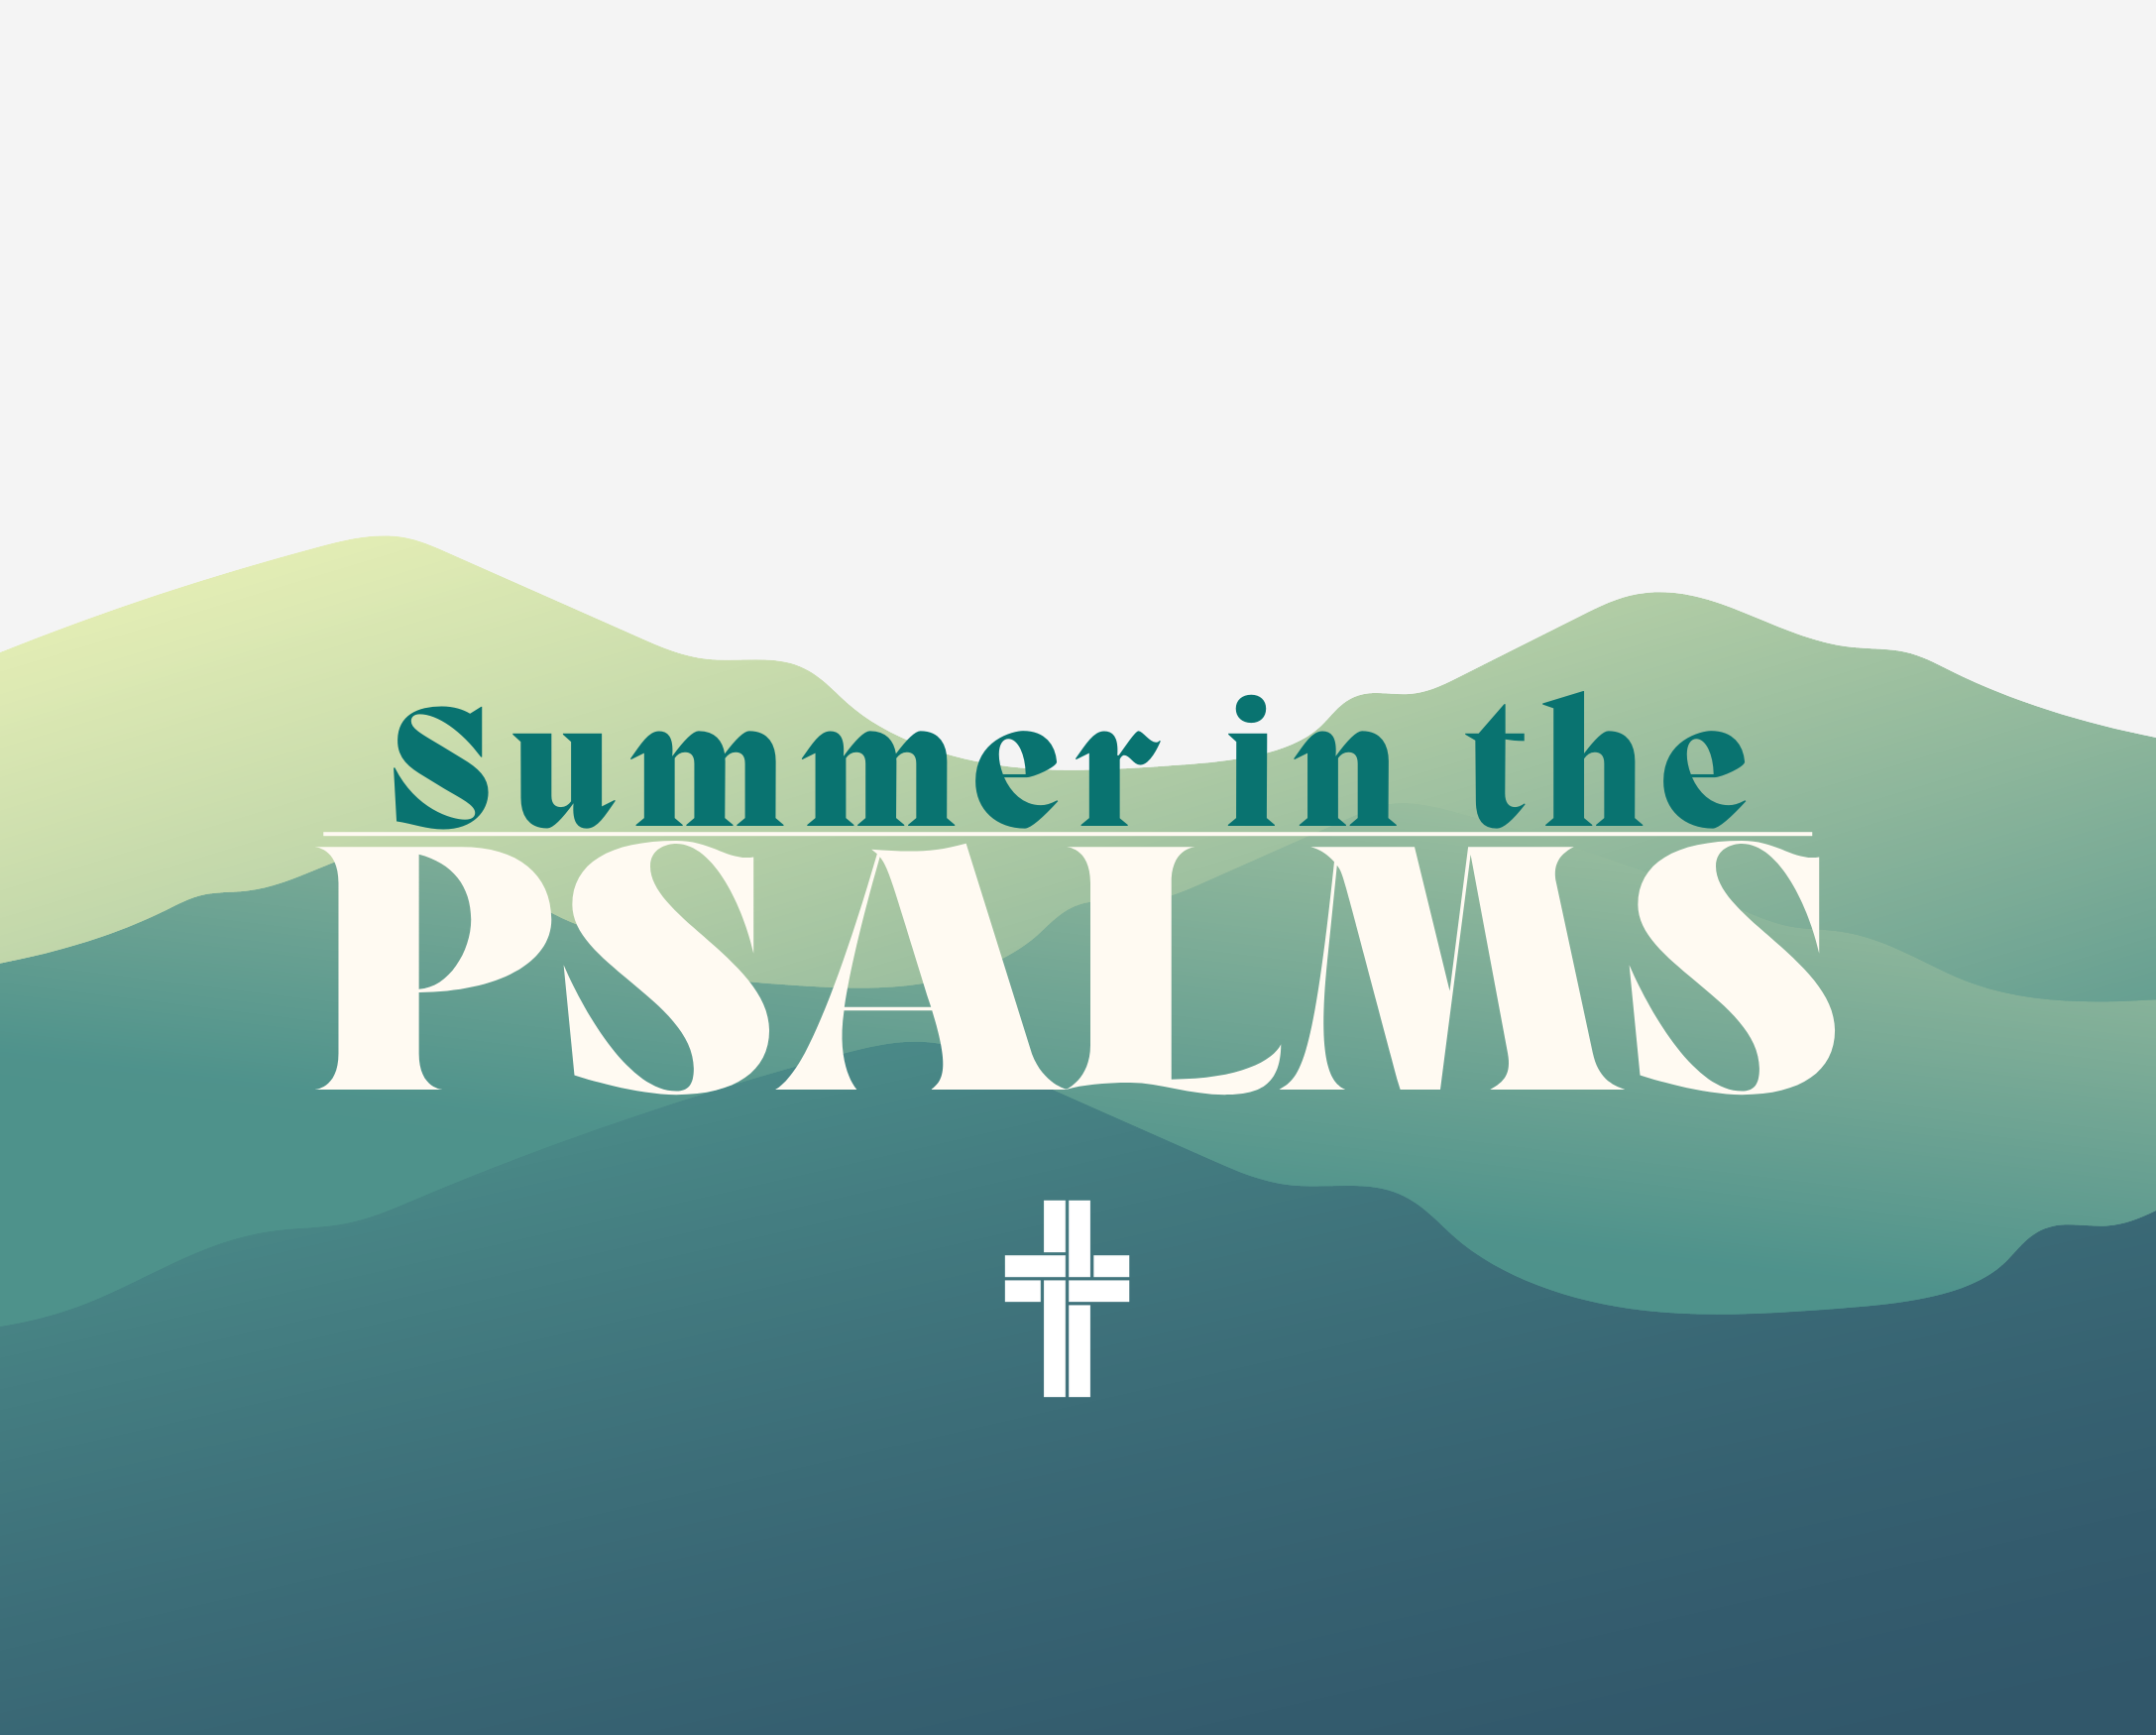 Summer In The Psalms: Let My Cry Come to You